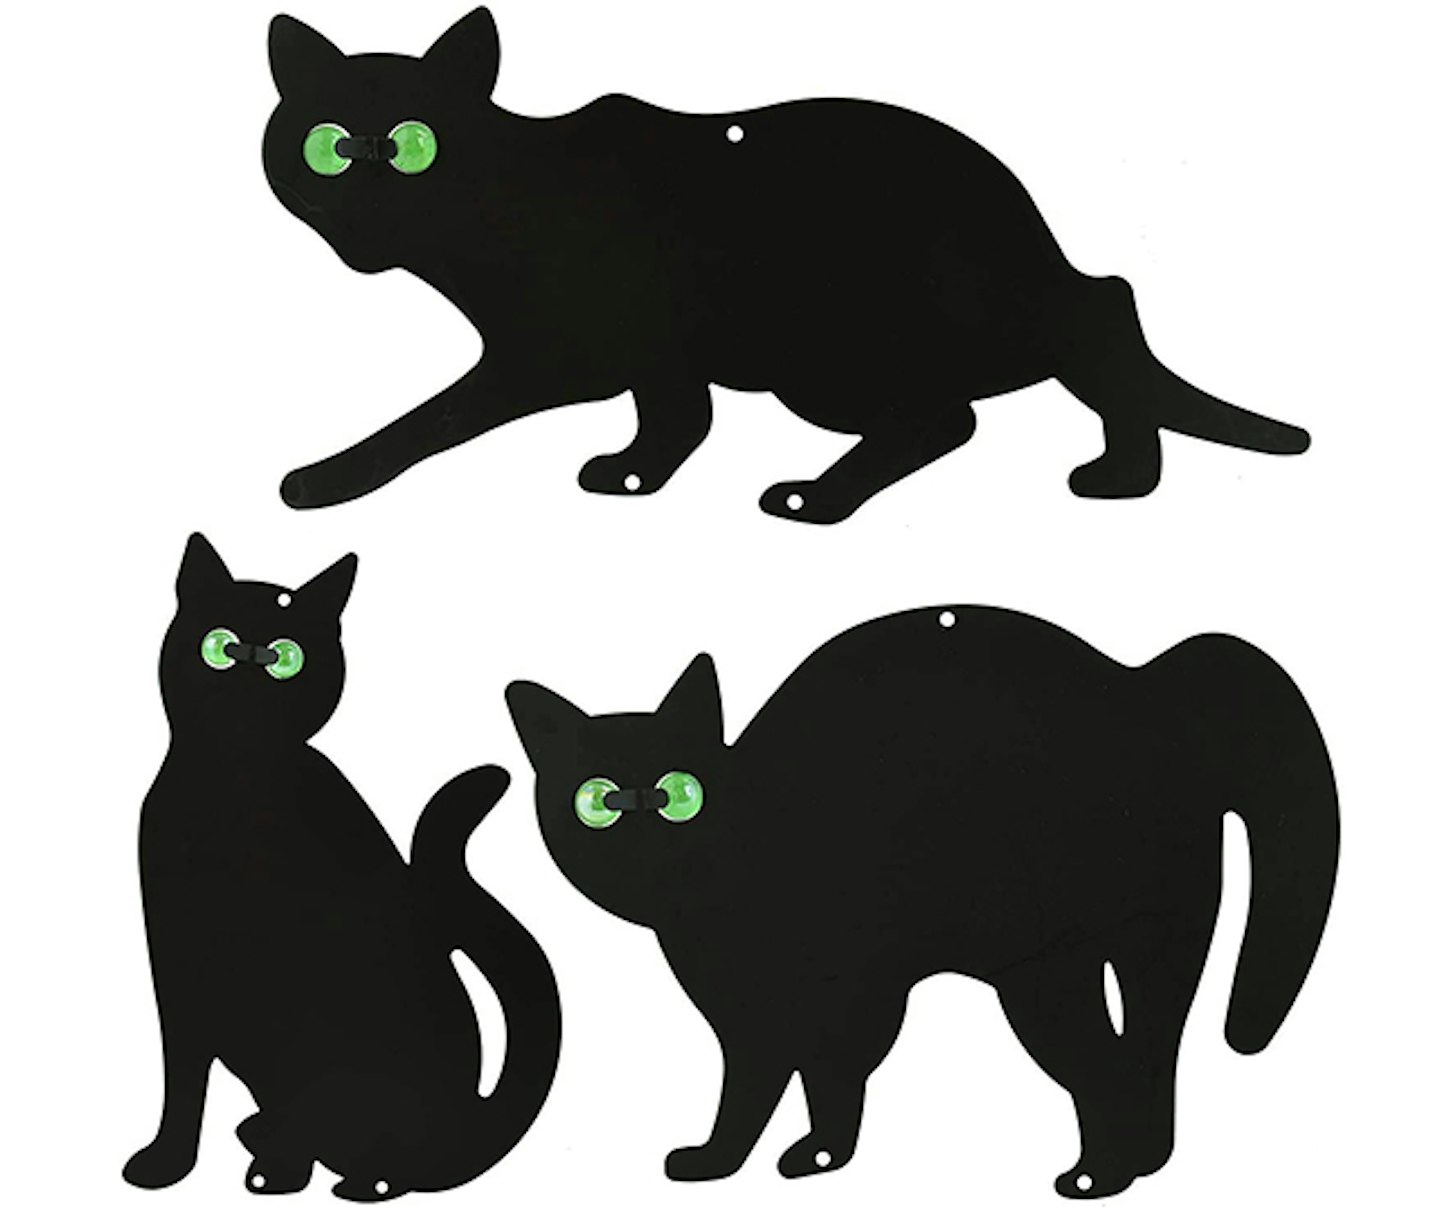 Metal cat silhouettes with reflective eyes